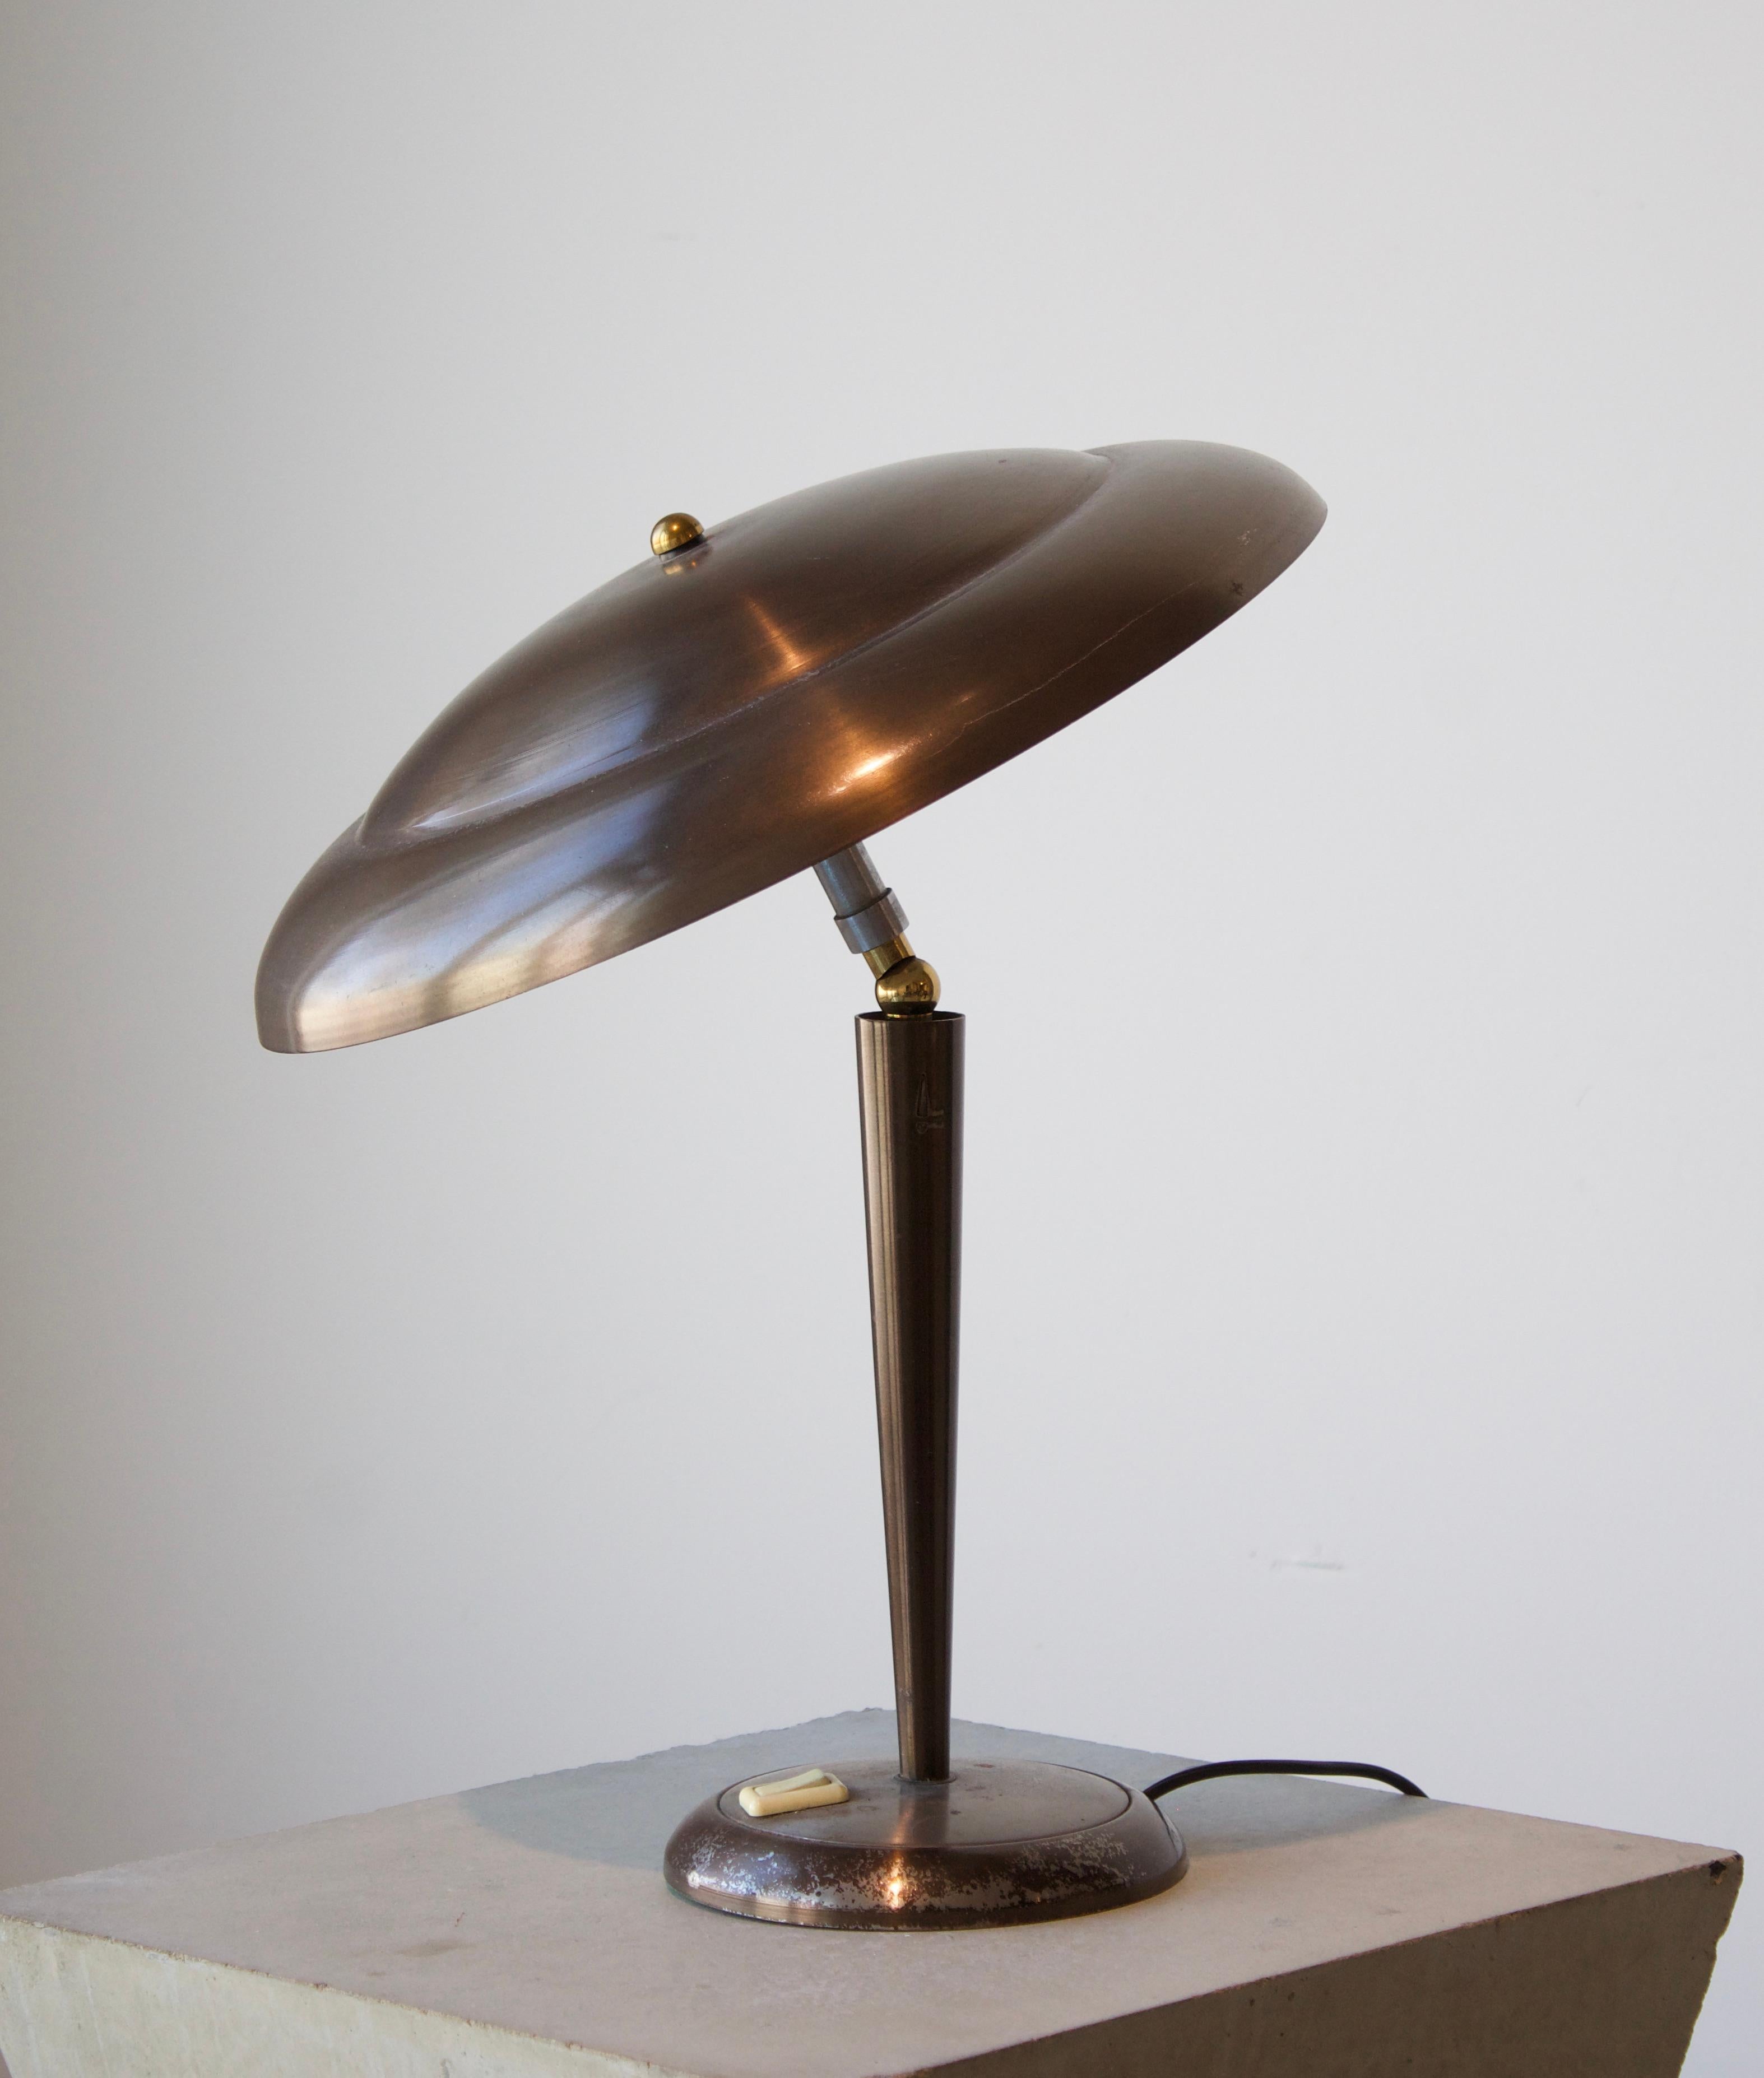 A table lamp. Designed and produced in Italy, 1950s. In brass with metal hardware. 

Other designers and makers of the period include Gabriella Crespi, Maria Pergay, Max Ingrand, Stilnovo, and Fontana Arte.